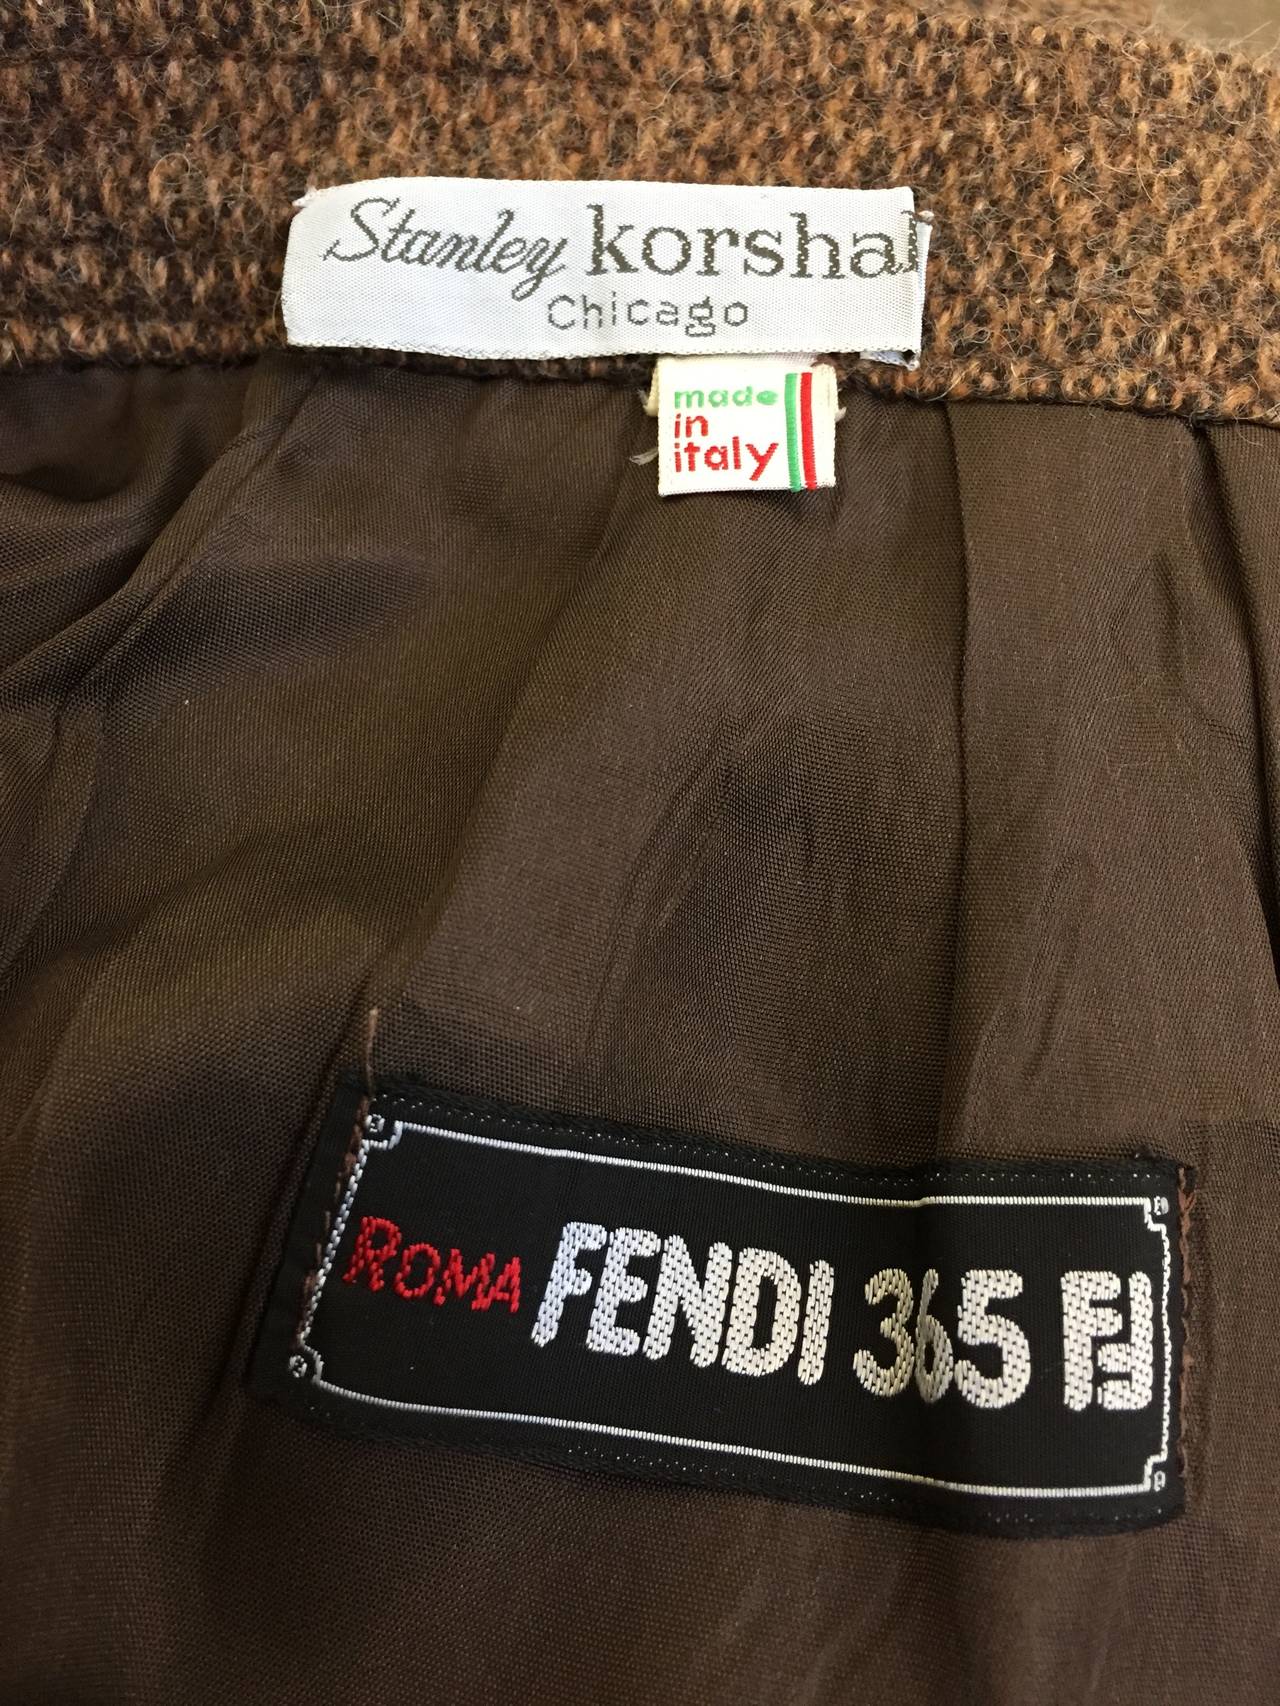 Fendi by Karl Lagerfeld 80s Suit Size 6. For Sale 2